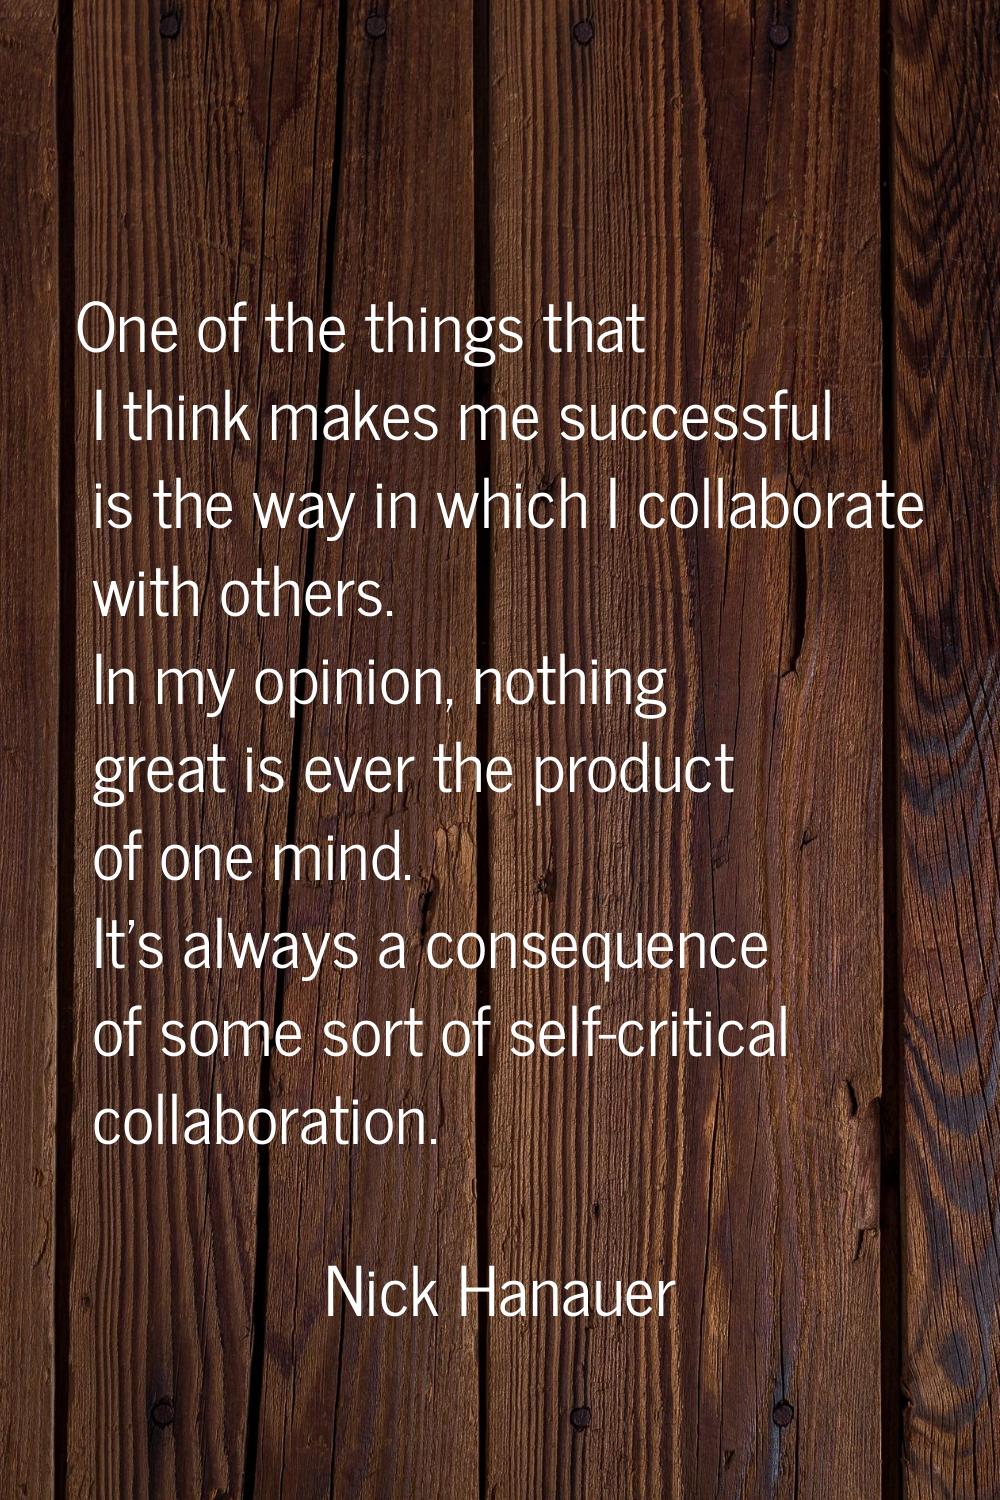 One of the things that I think makes me successful is the way in which I collaborate with others. I